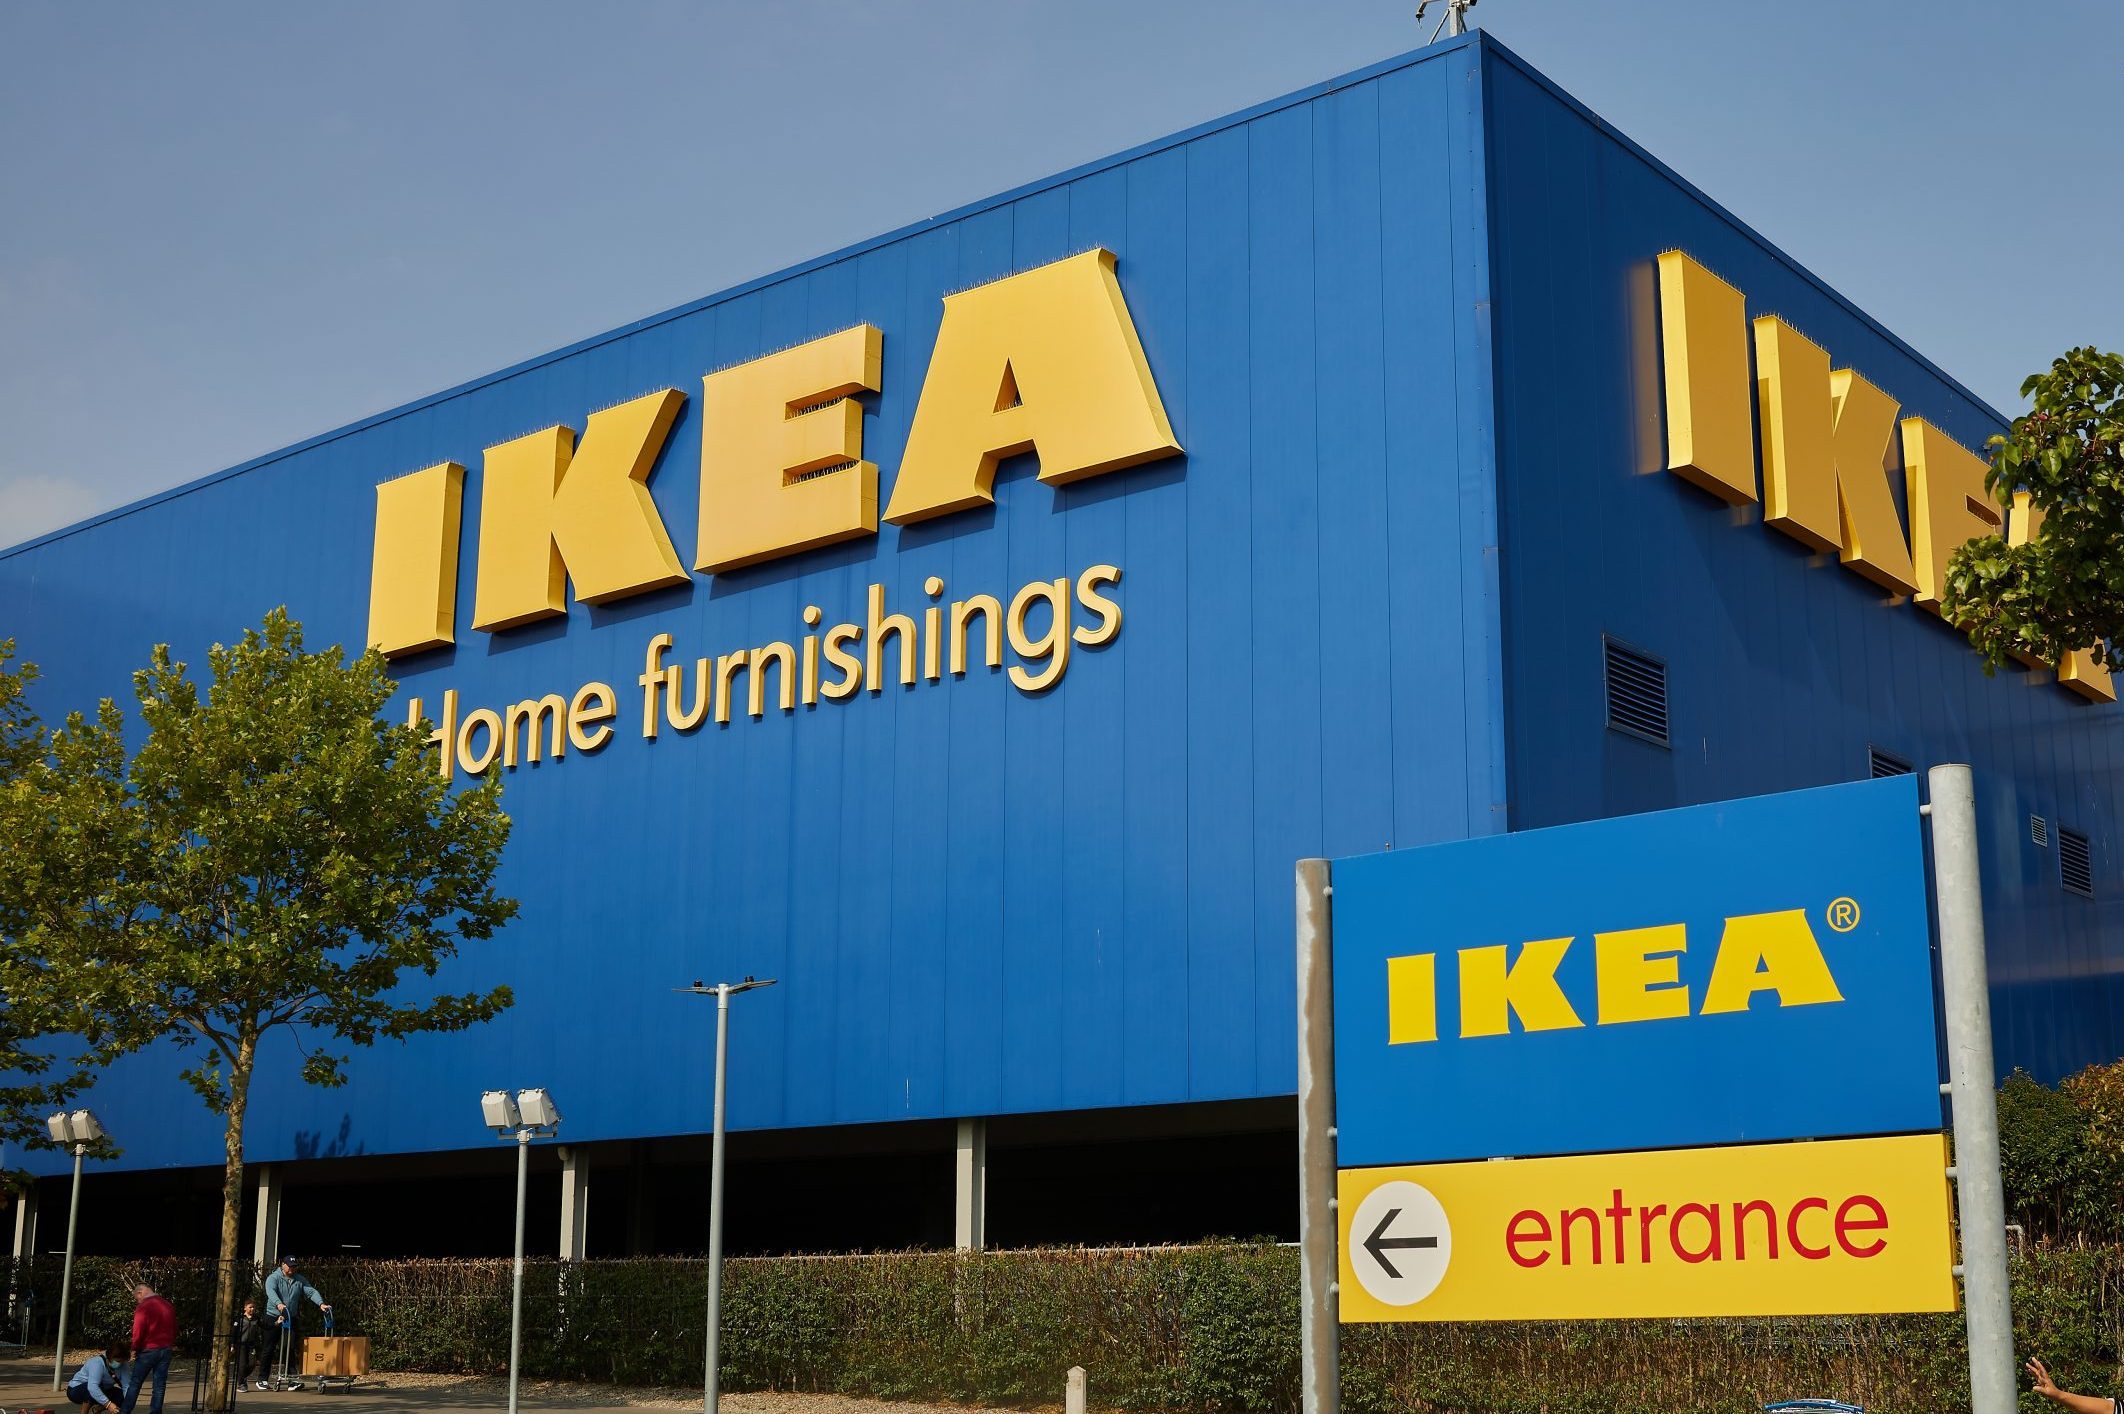 21 Ikea Product Names And What They Actually Mean Taste Of Home